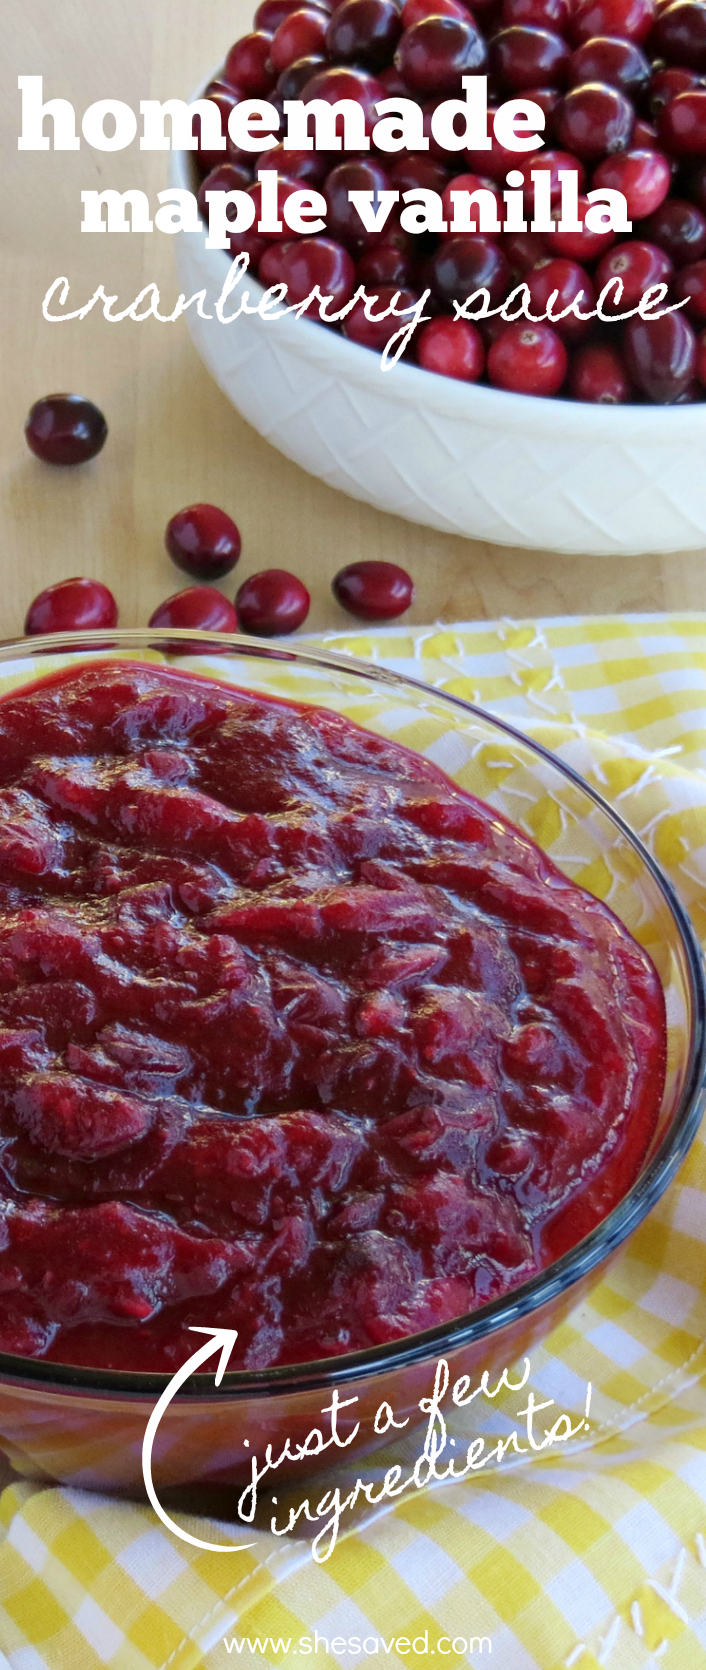 homemade cranberry sauce recipe made with vanilla and maple syrup